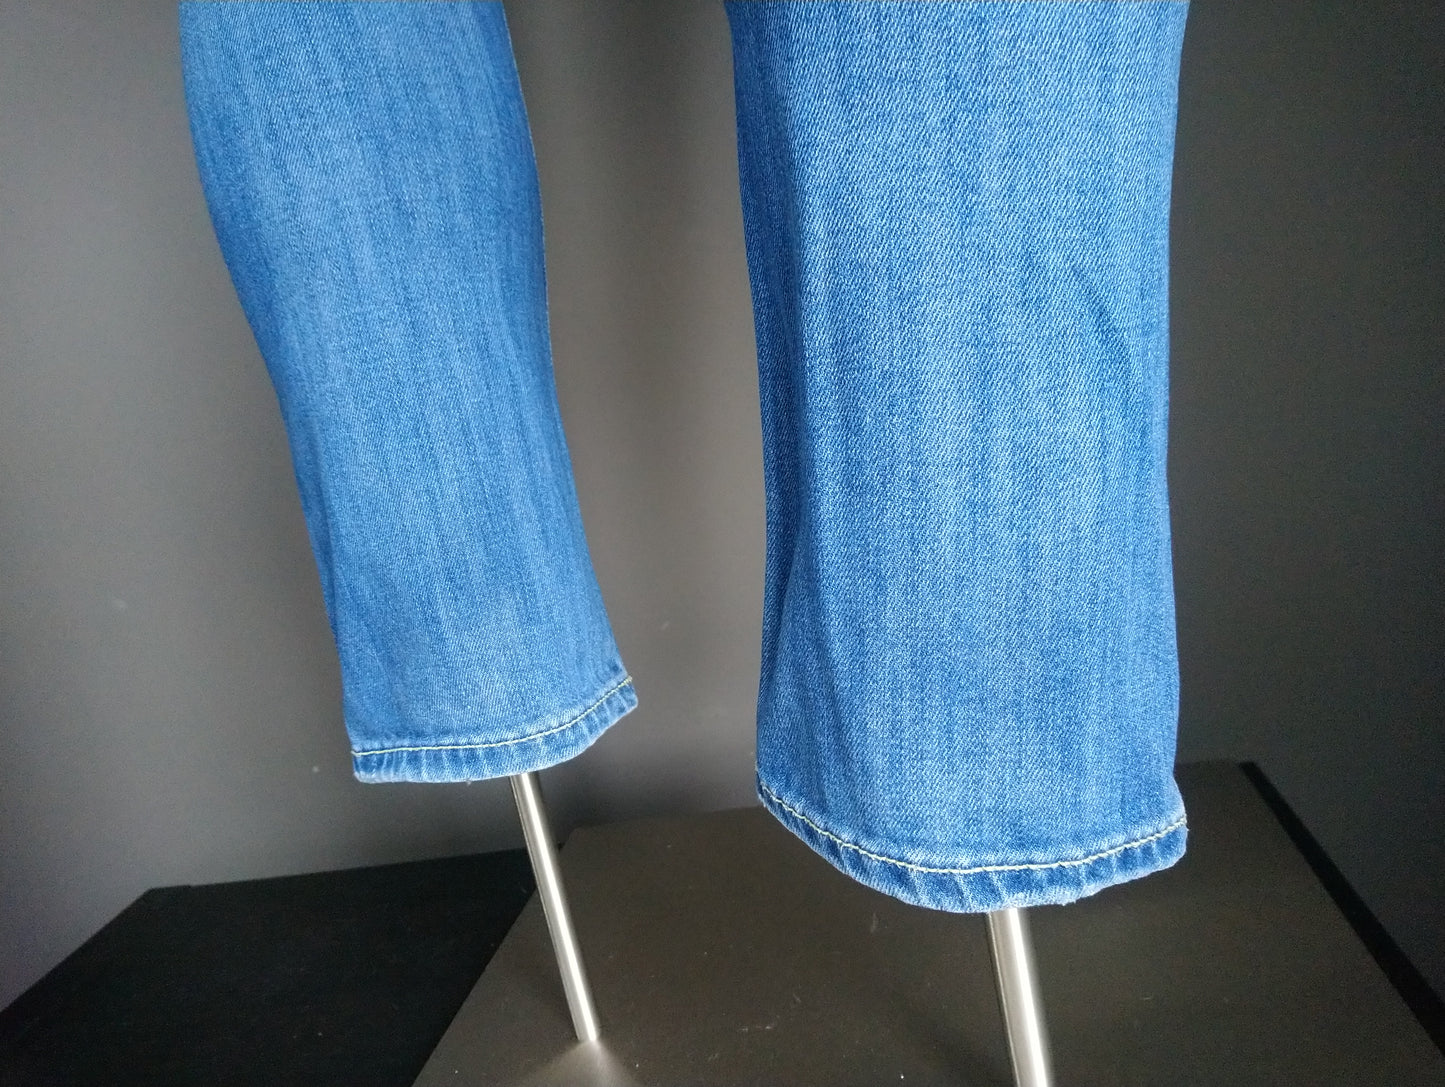 Dondup jeans. Blauw gekleurd. Maat W32 - L30. type Conway. Tappered Fit.